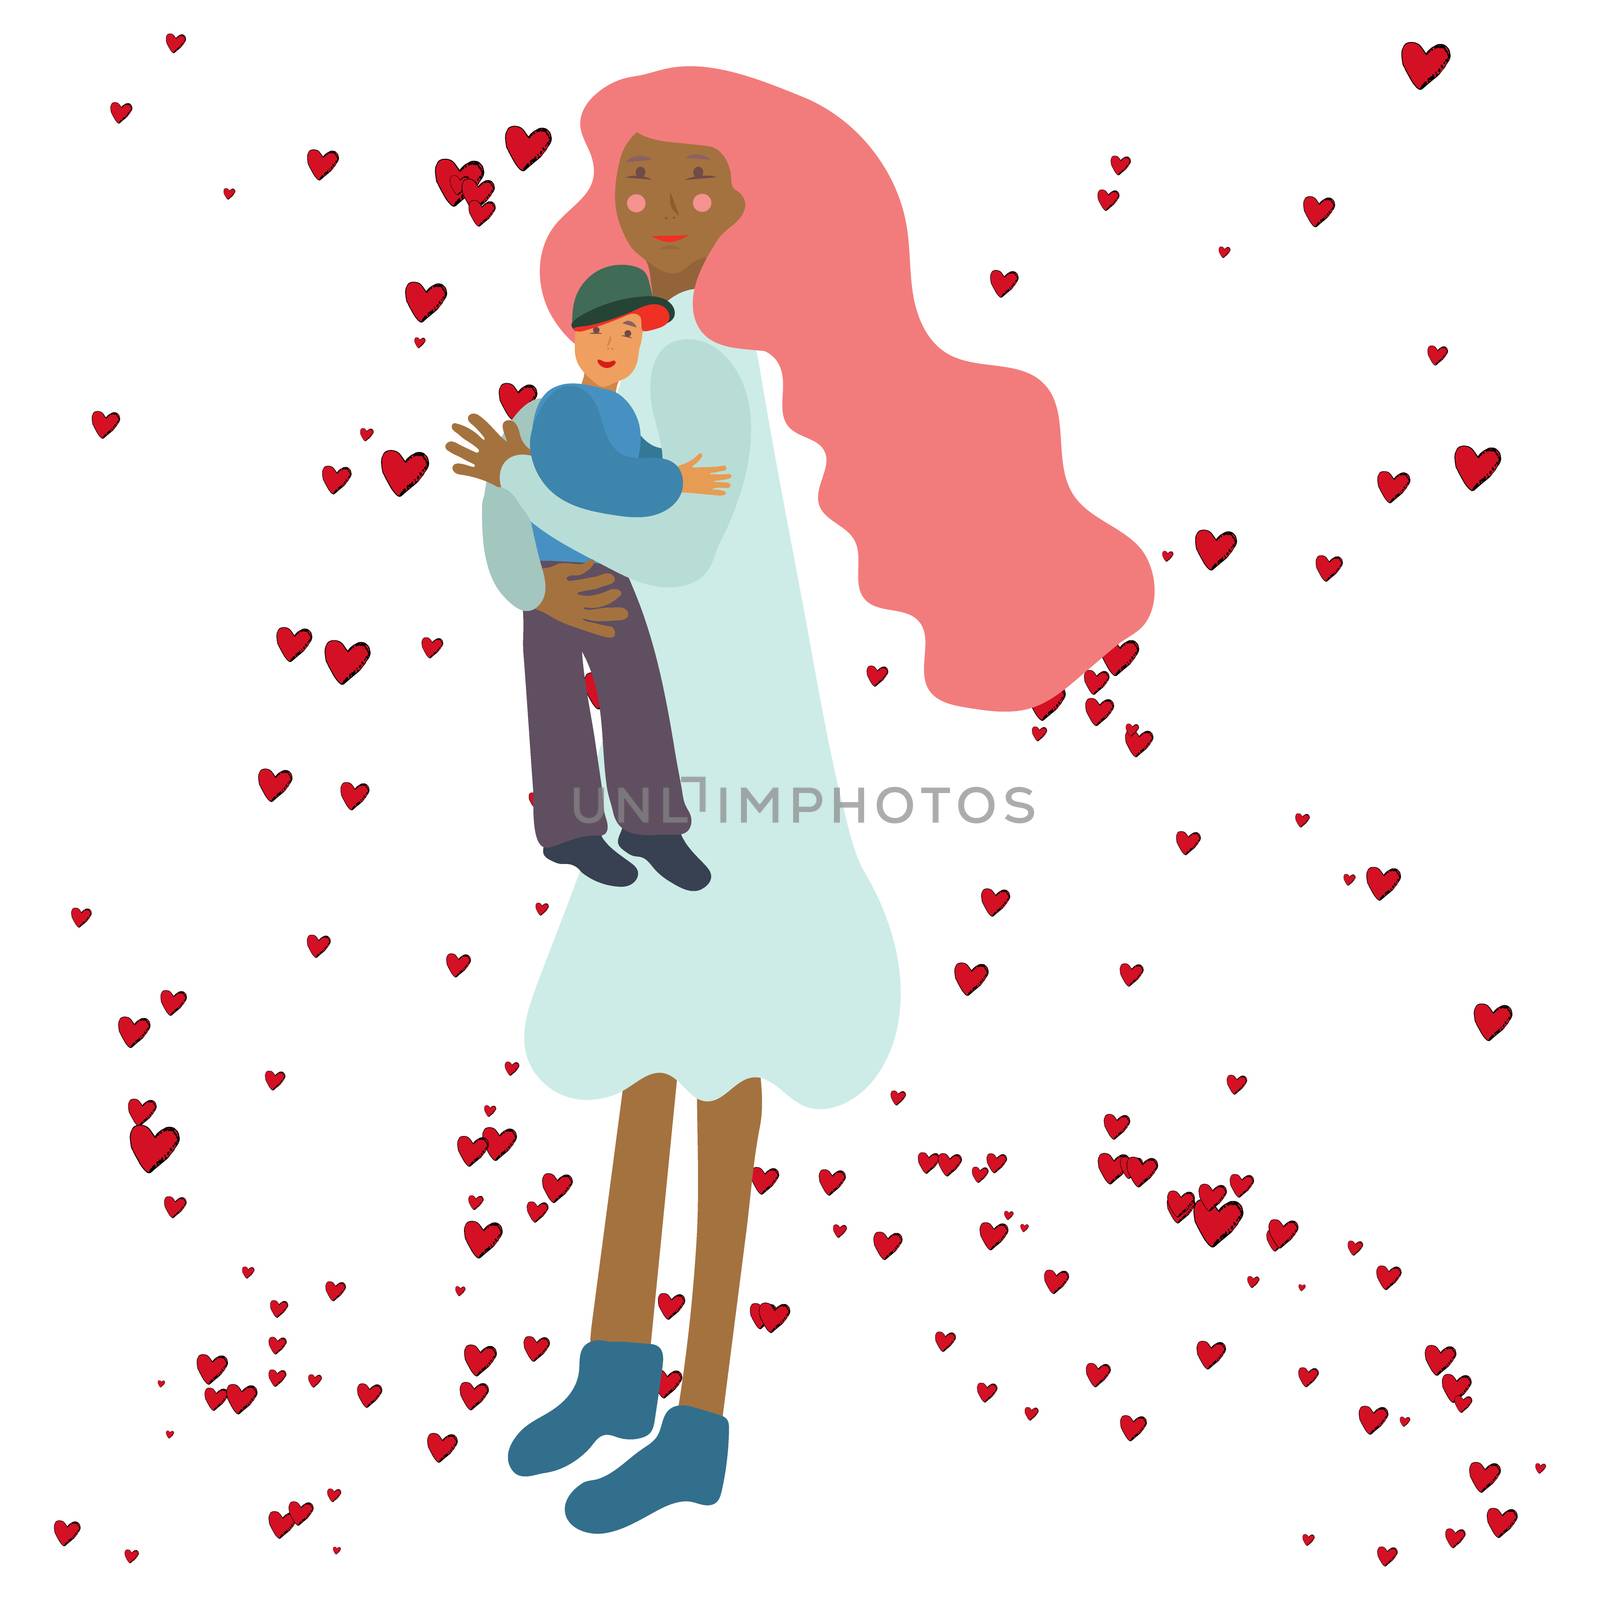 Loving family. Mother and son together and cuddling. Parent and children hugging. Flat cartoon characters isolated on white background. Colorful vector illustration.